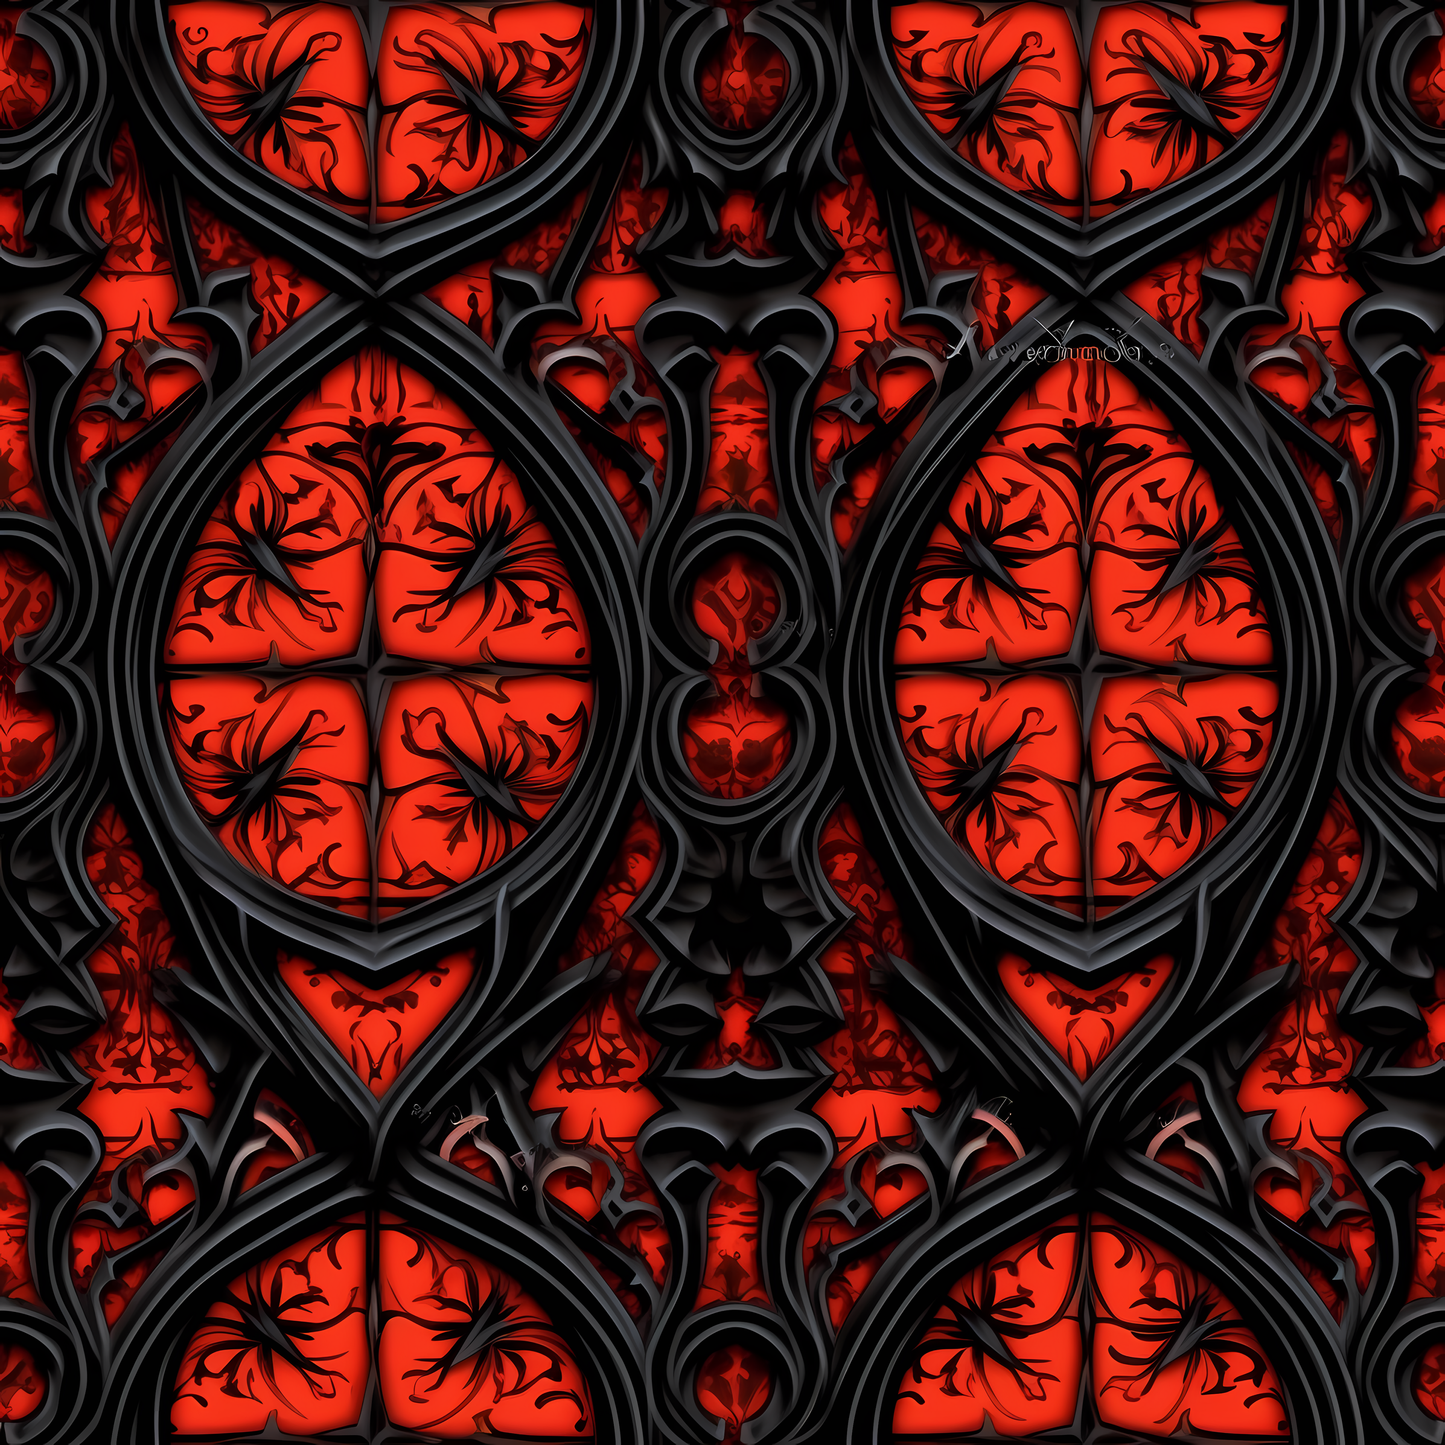 GOTHIC ABSTRACT